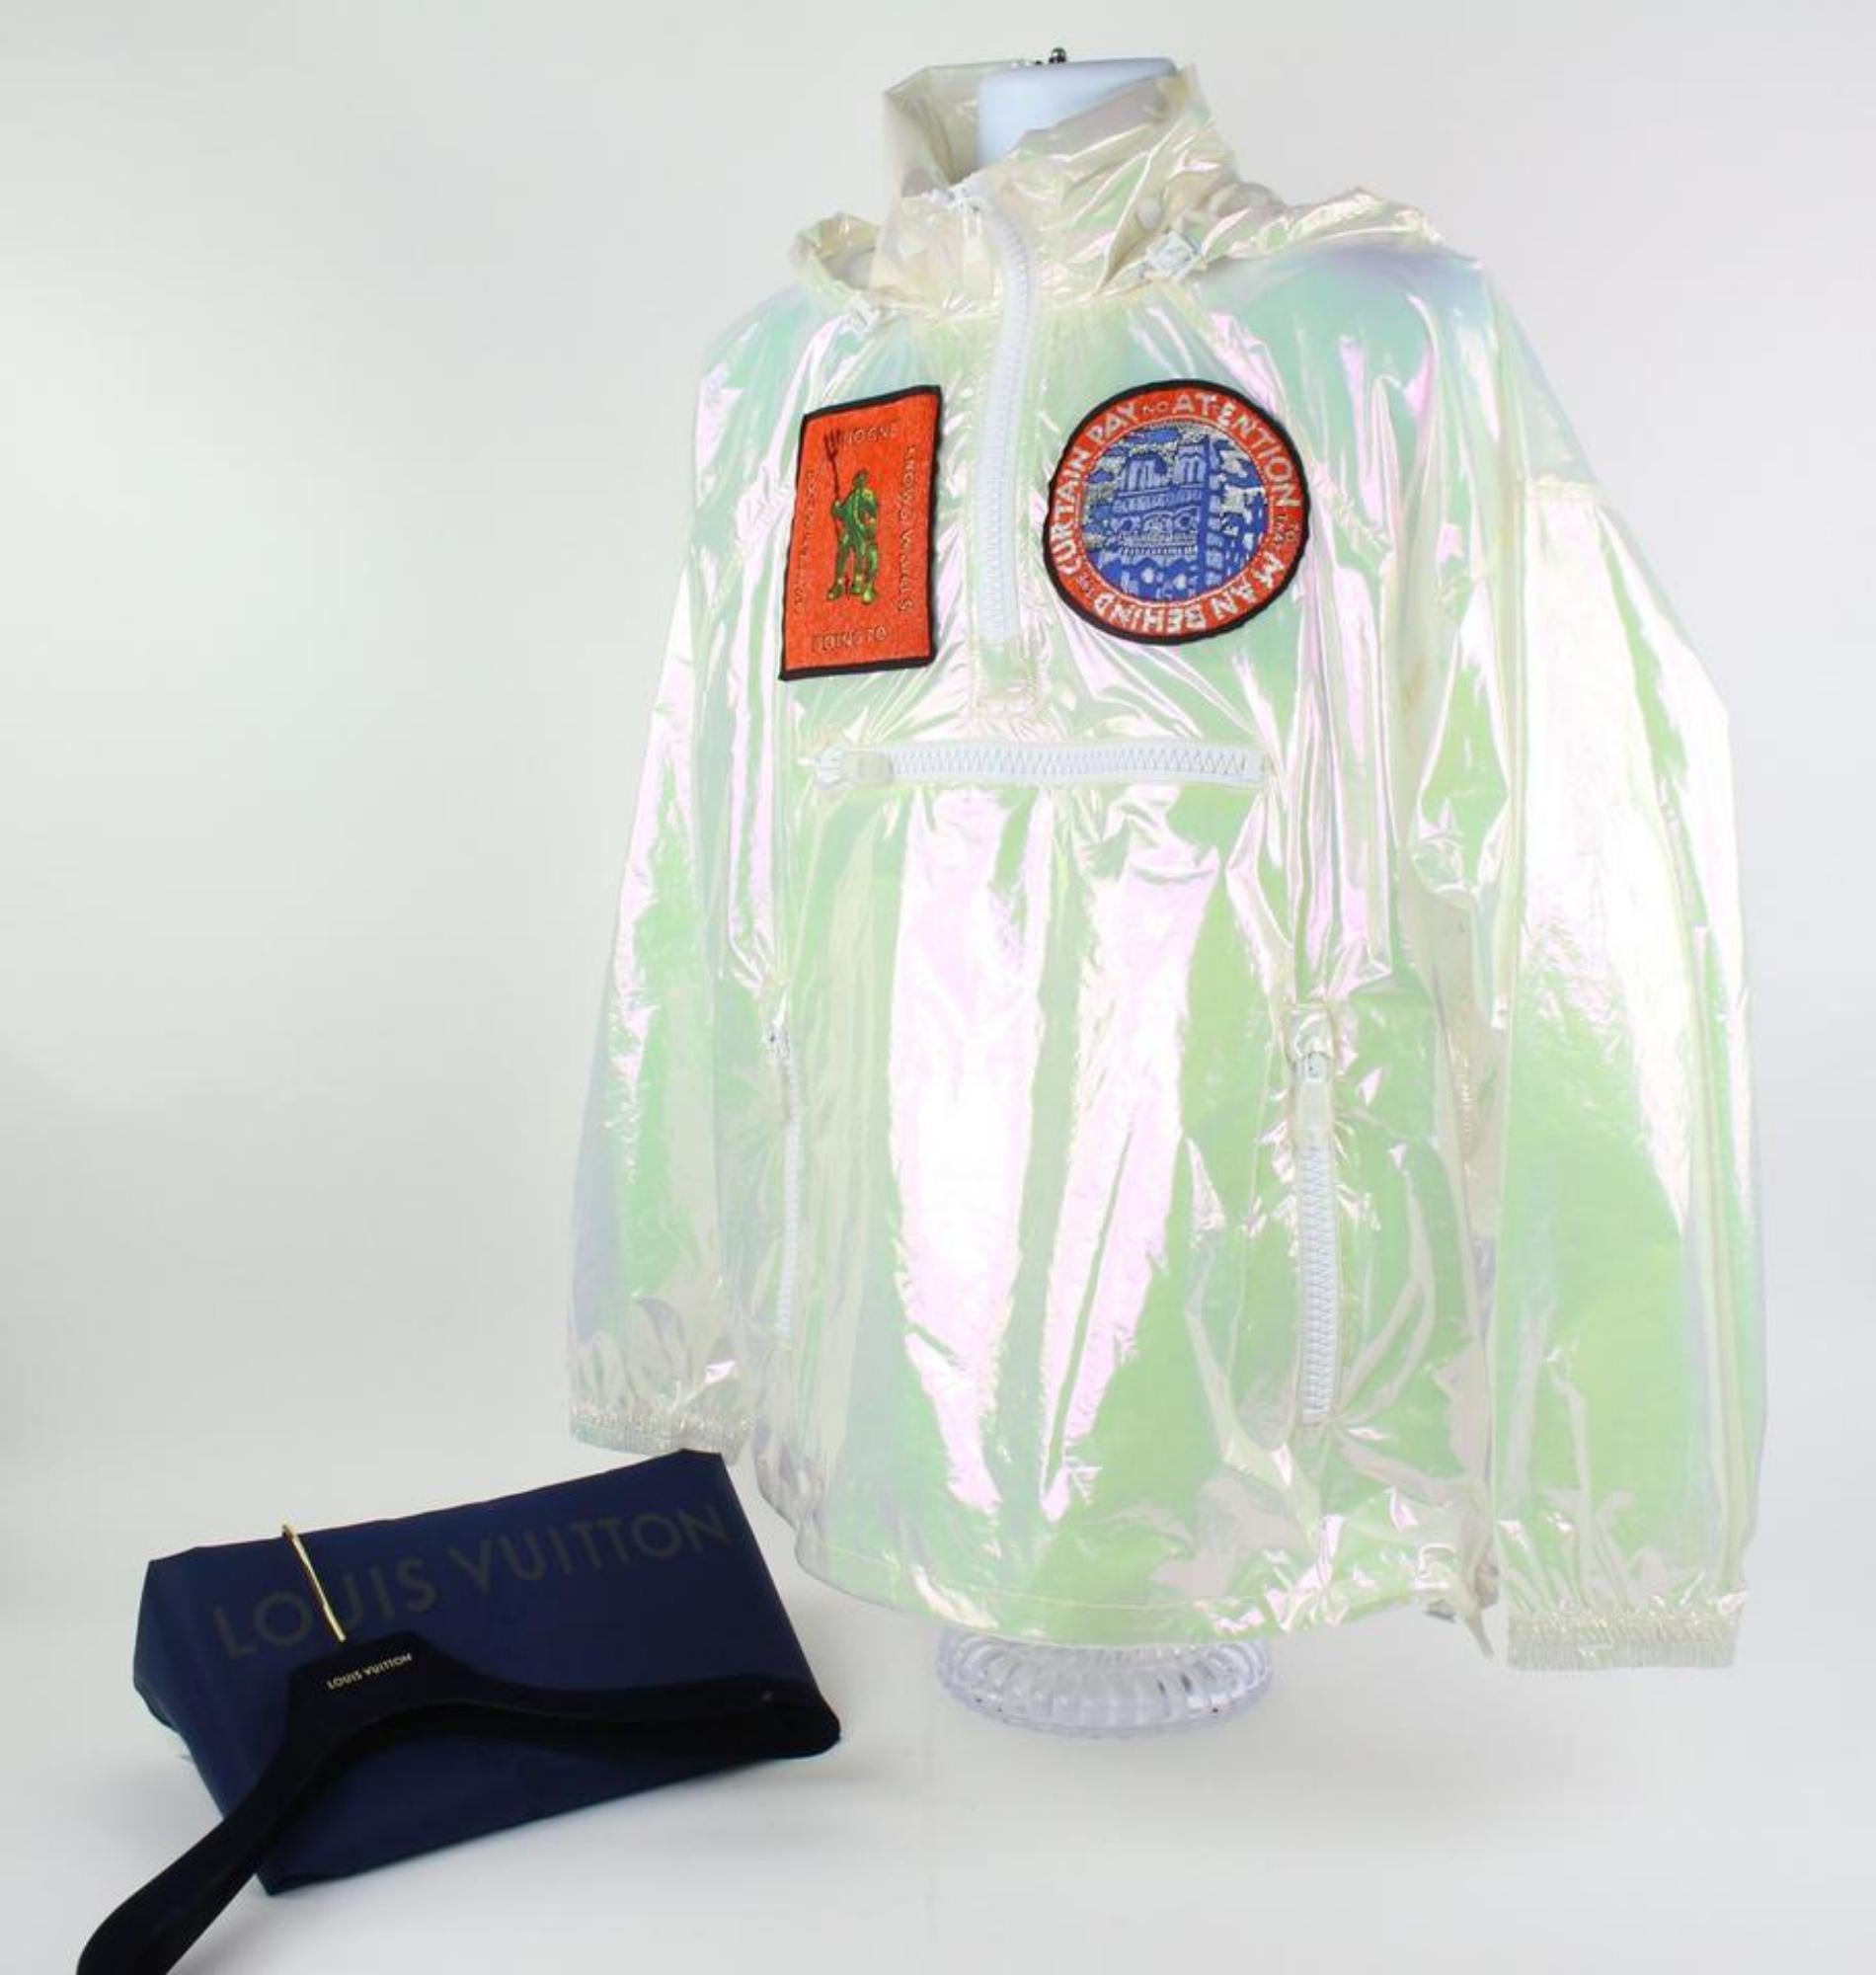 Louis Vuitton ss19 Virgil Abloh Debut Prism Transparent Patches Windbreaker 
OVERALL NEW CONDITION
( 10/10 or N )
Includes Garment Cover, Receipt and Hanger
Size 50
BRAND NEW

This item will ship out immediately.
Previously owned, unless otherwise